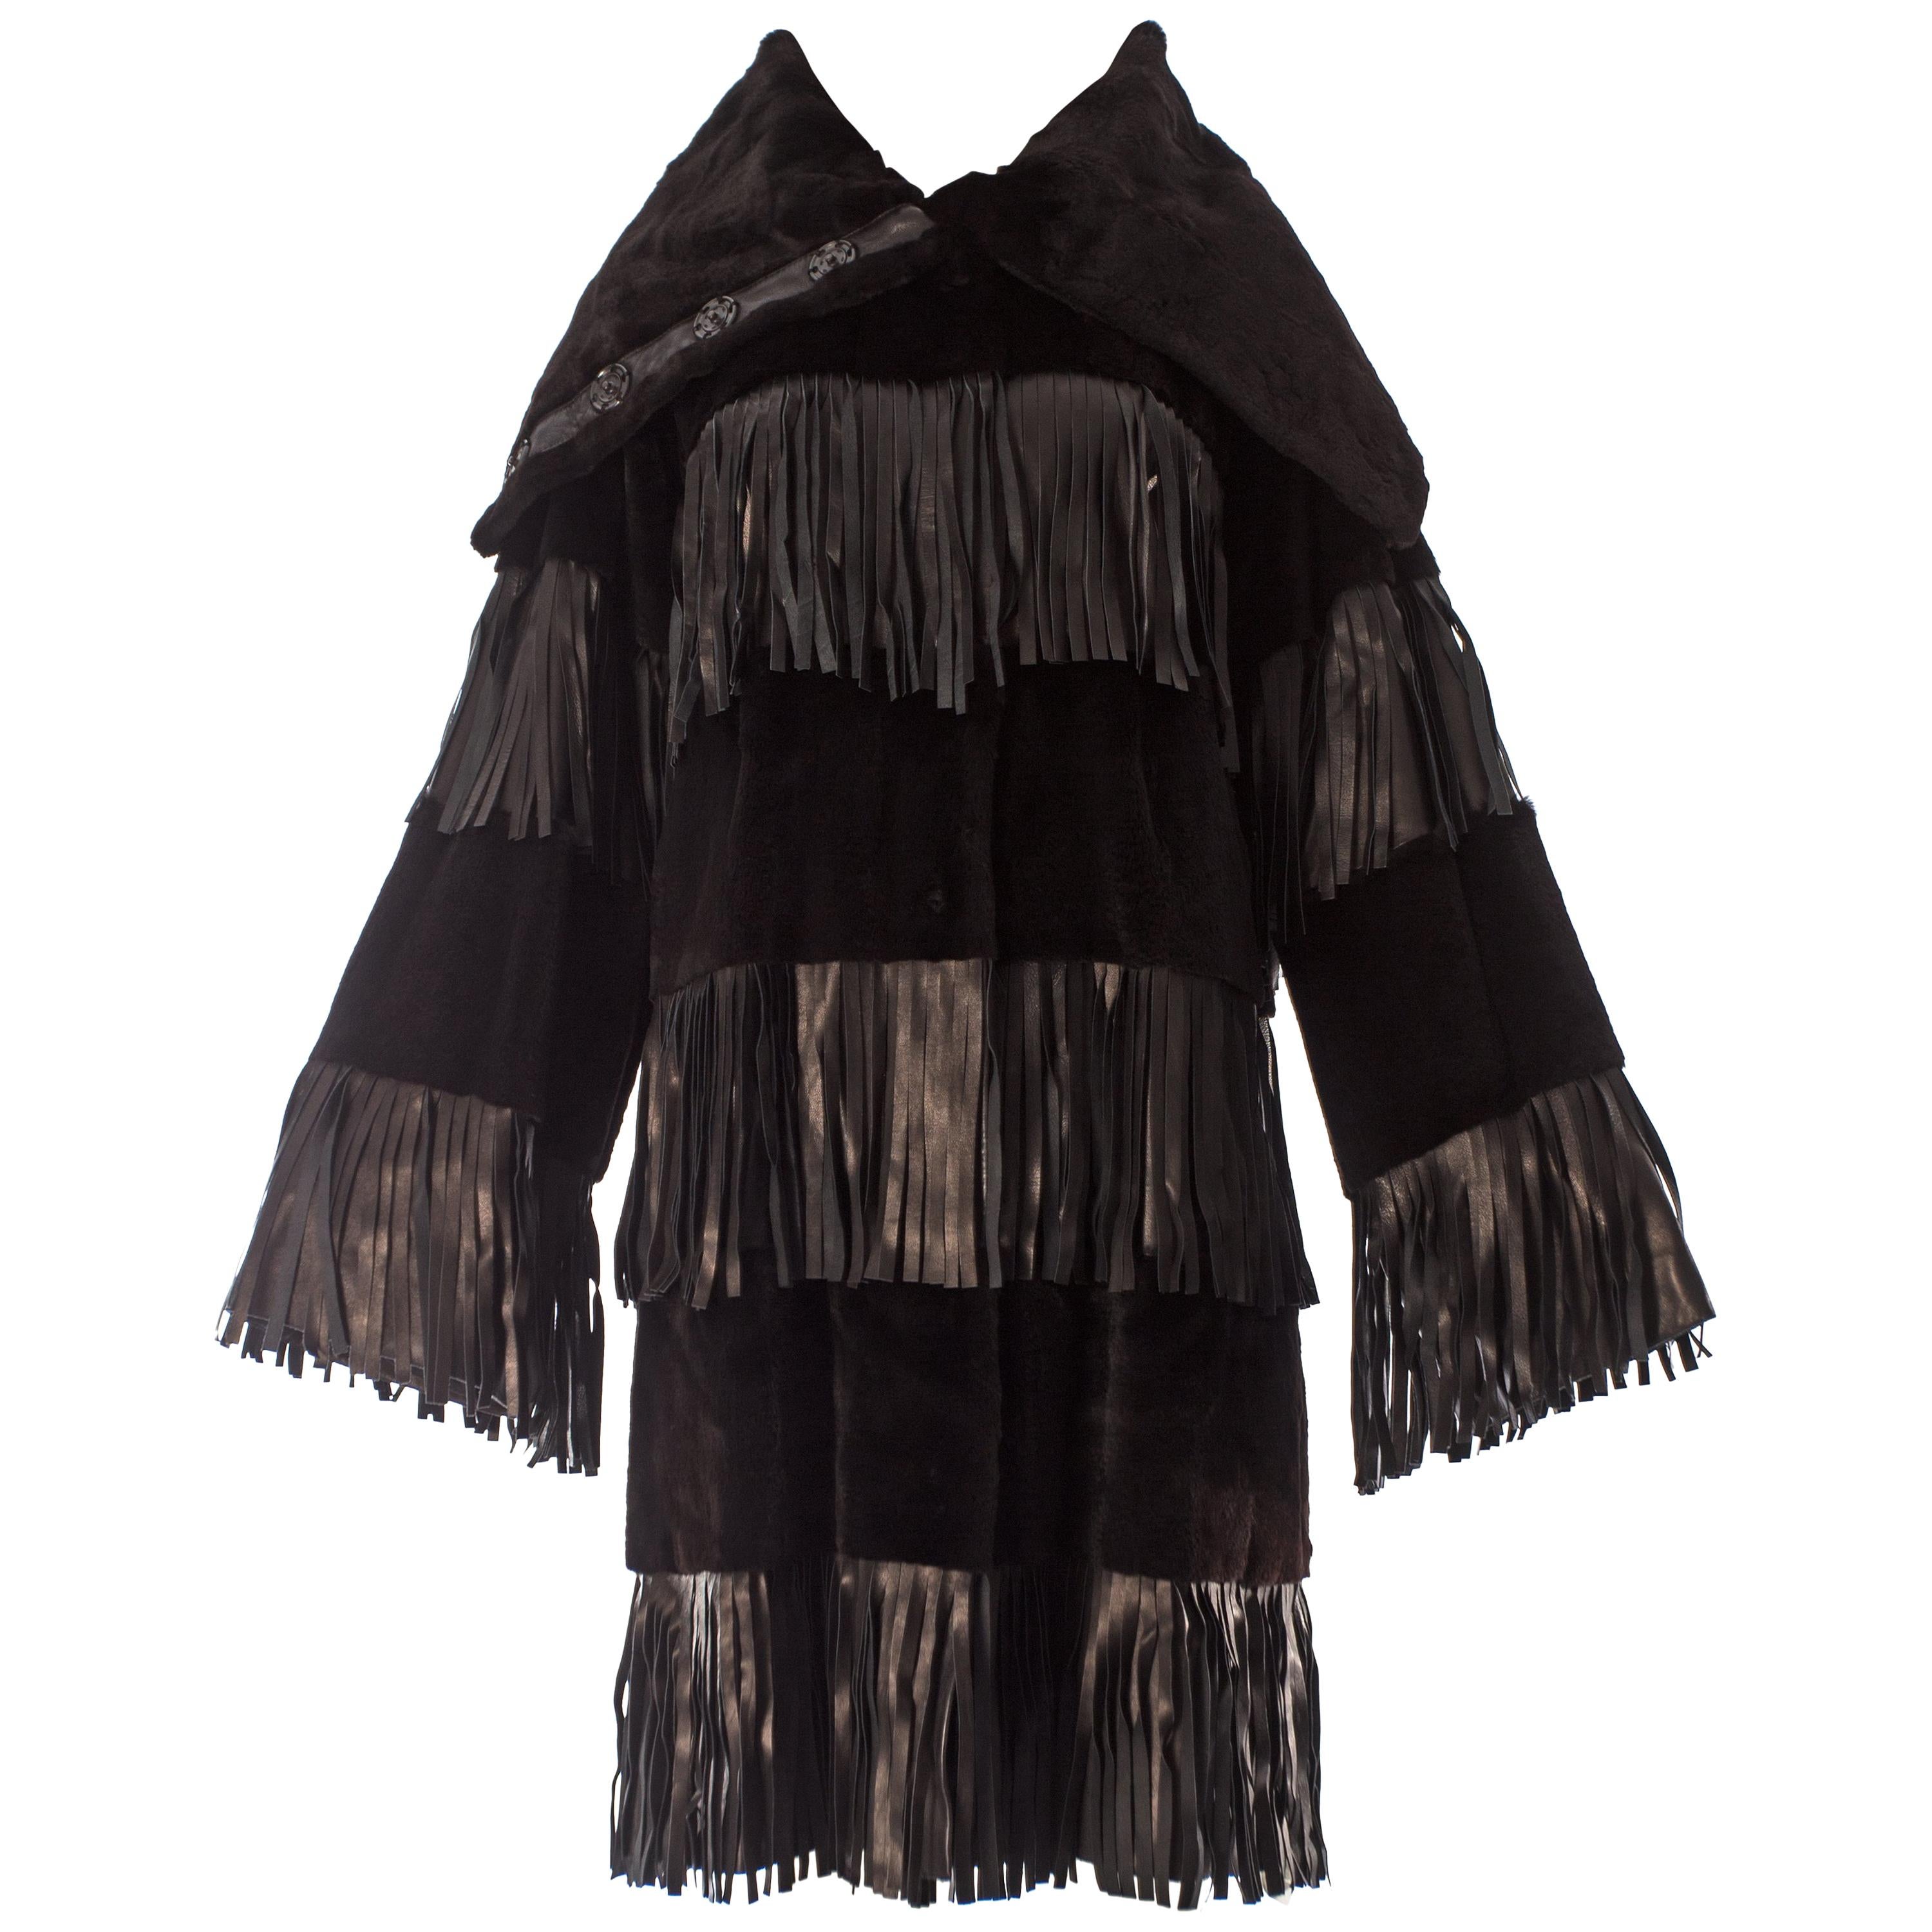 Dolce & Gabbana black sheared weasel fur coat with leather fringing, A / W 2003